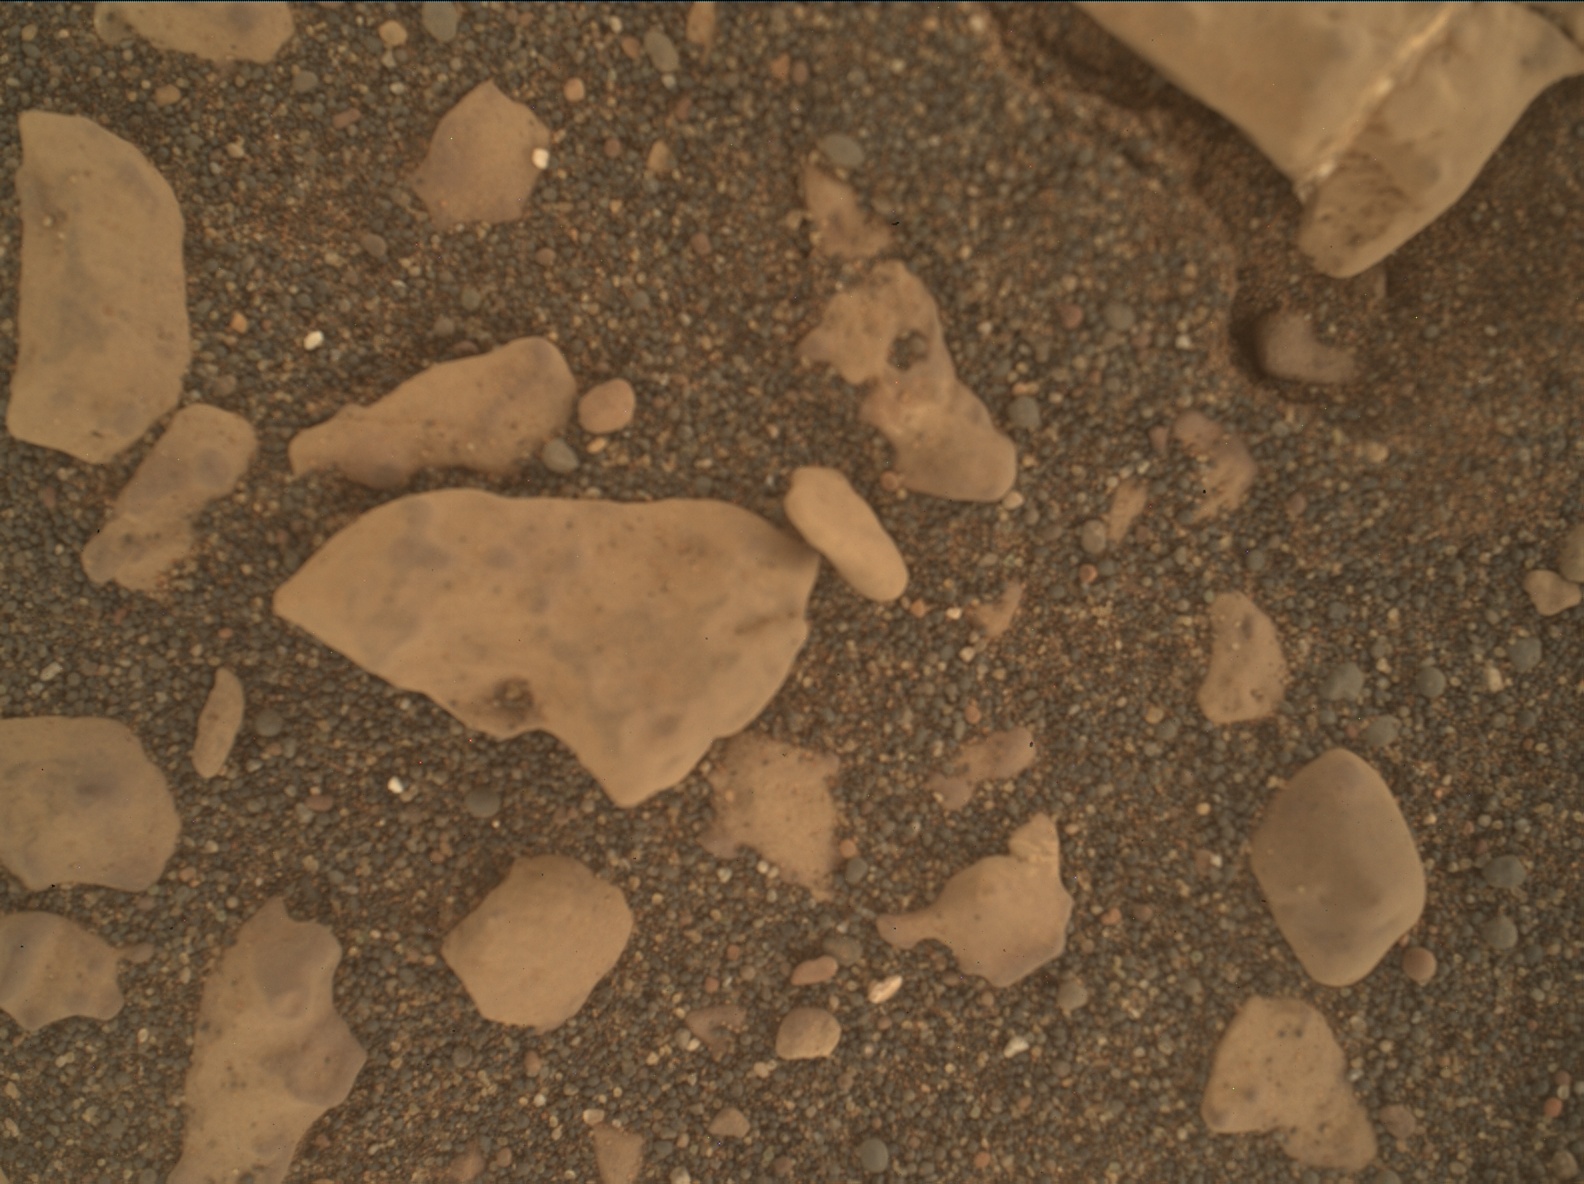 Nasa's Mars rover Curiosity acquired this image using its Mars Hand Lens Imager (MAHLI) on Sol 3036